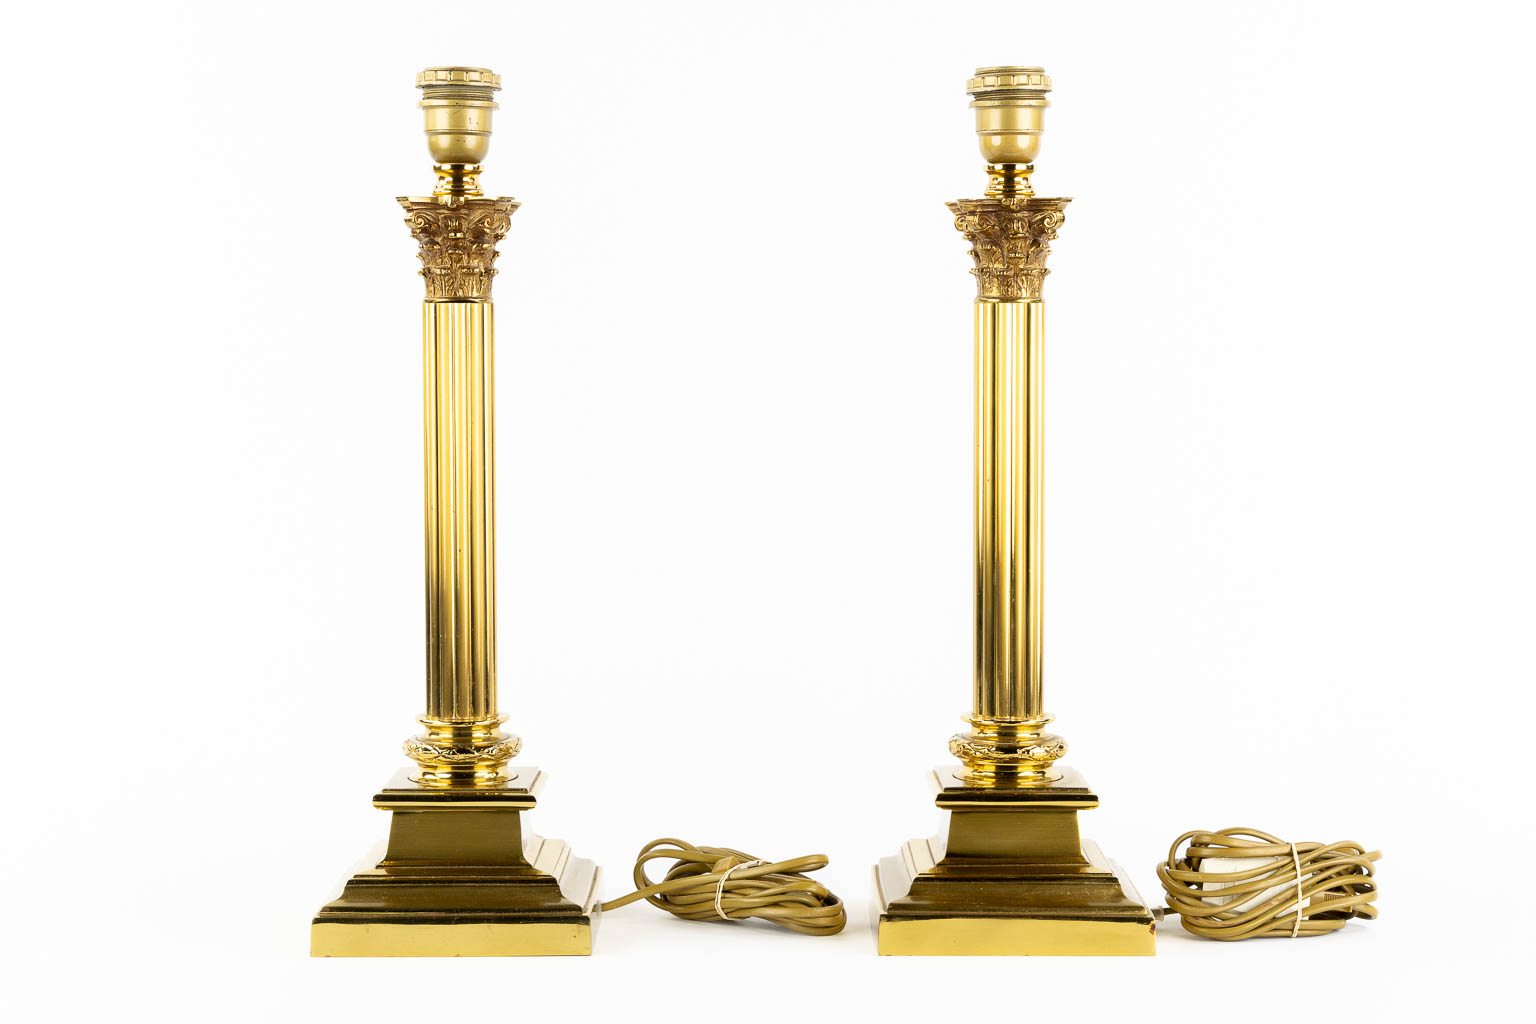 A decorative pair of table lamps with Corinthian pillars. (L:15 x W:15 x H:48 cm) - Image 5 of 9